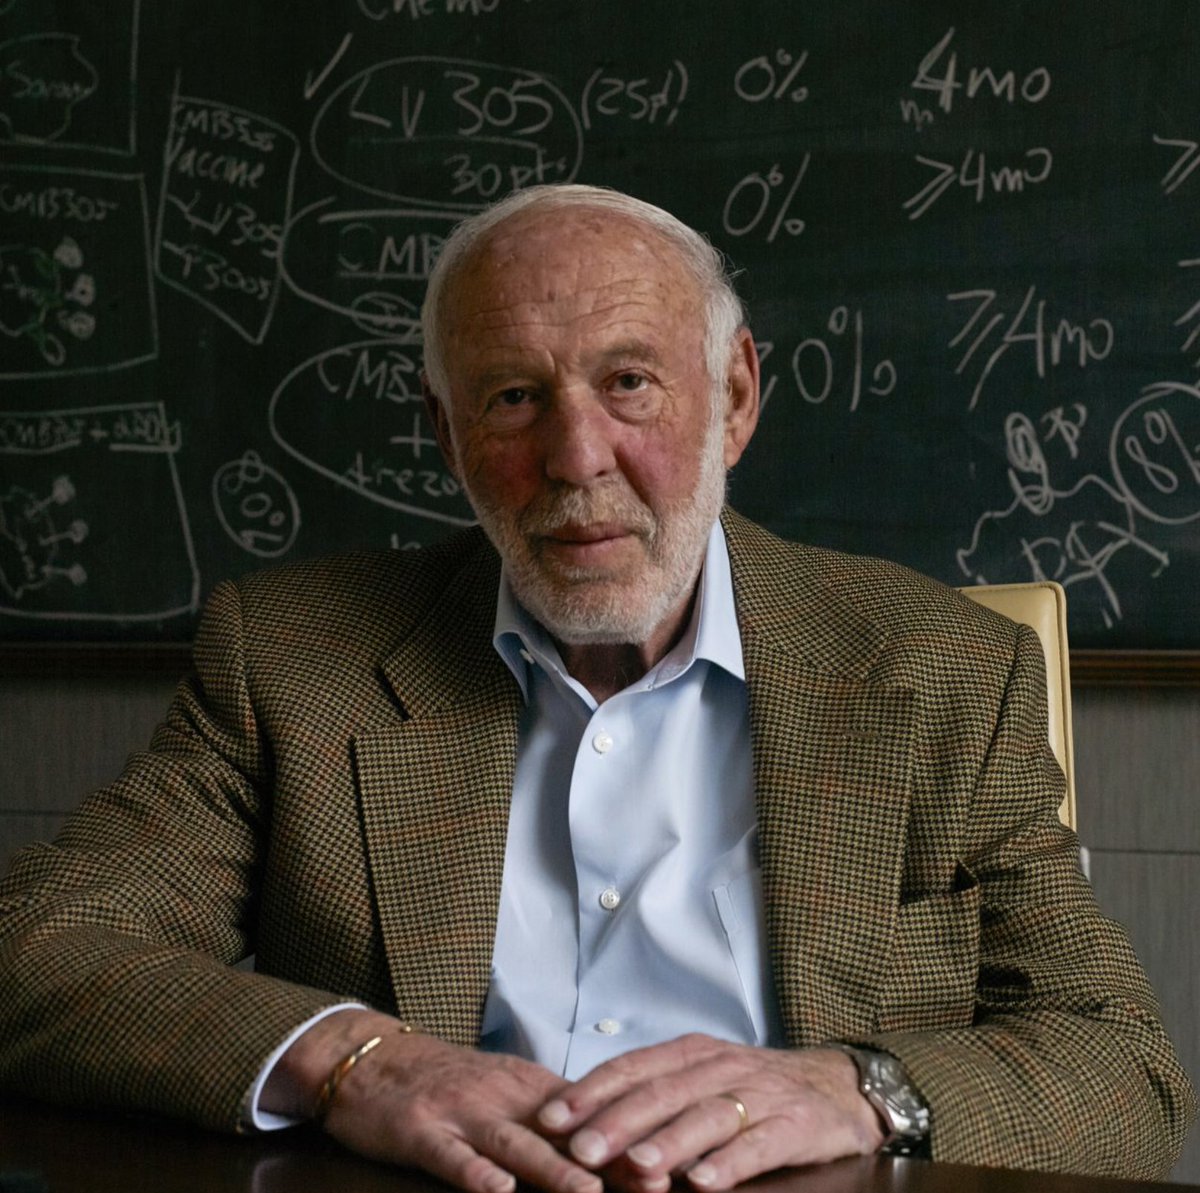 Jim Simons was a great man he was my inspiration when I was setting up my crypto quant trading firm I read his books, researched what he did listened to his talks RIP 🕯️